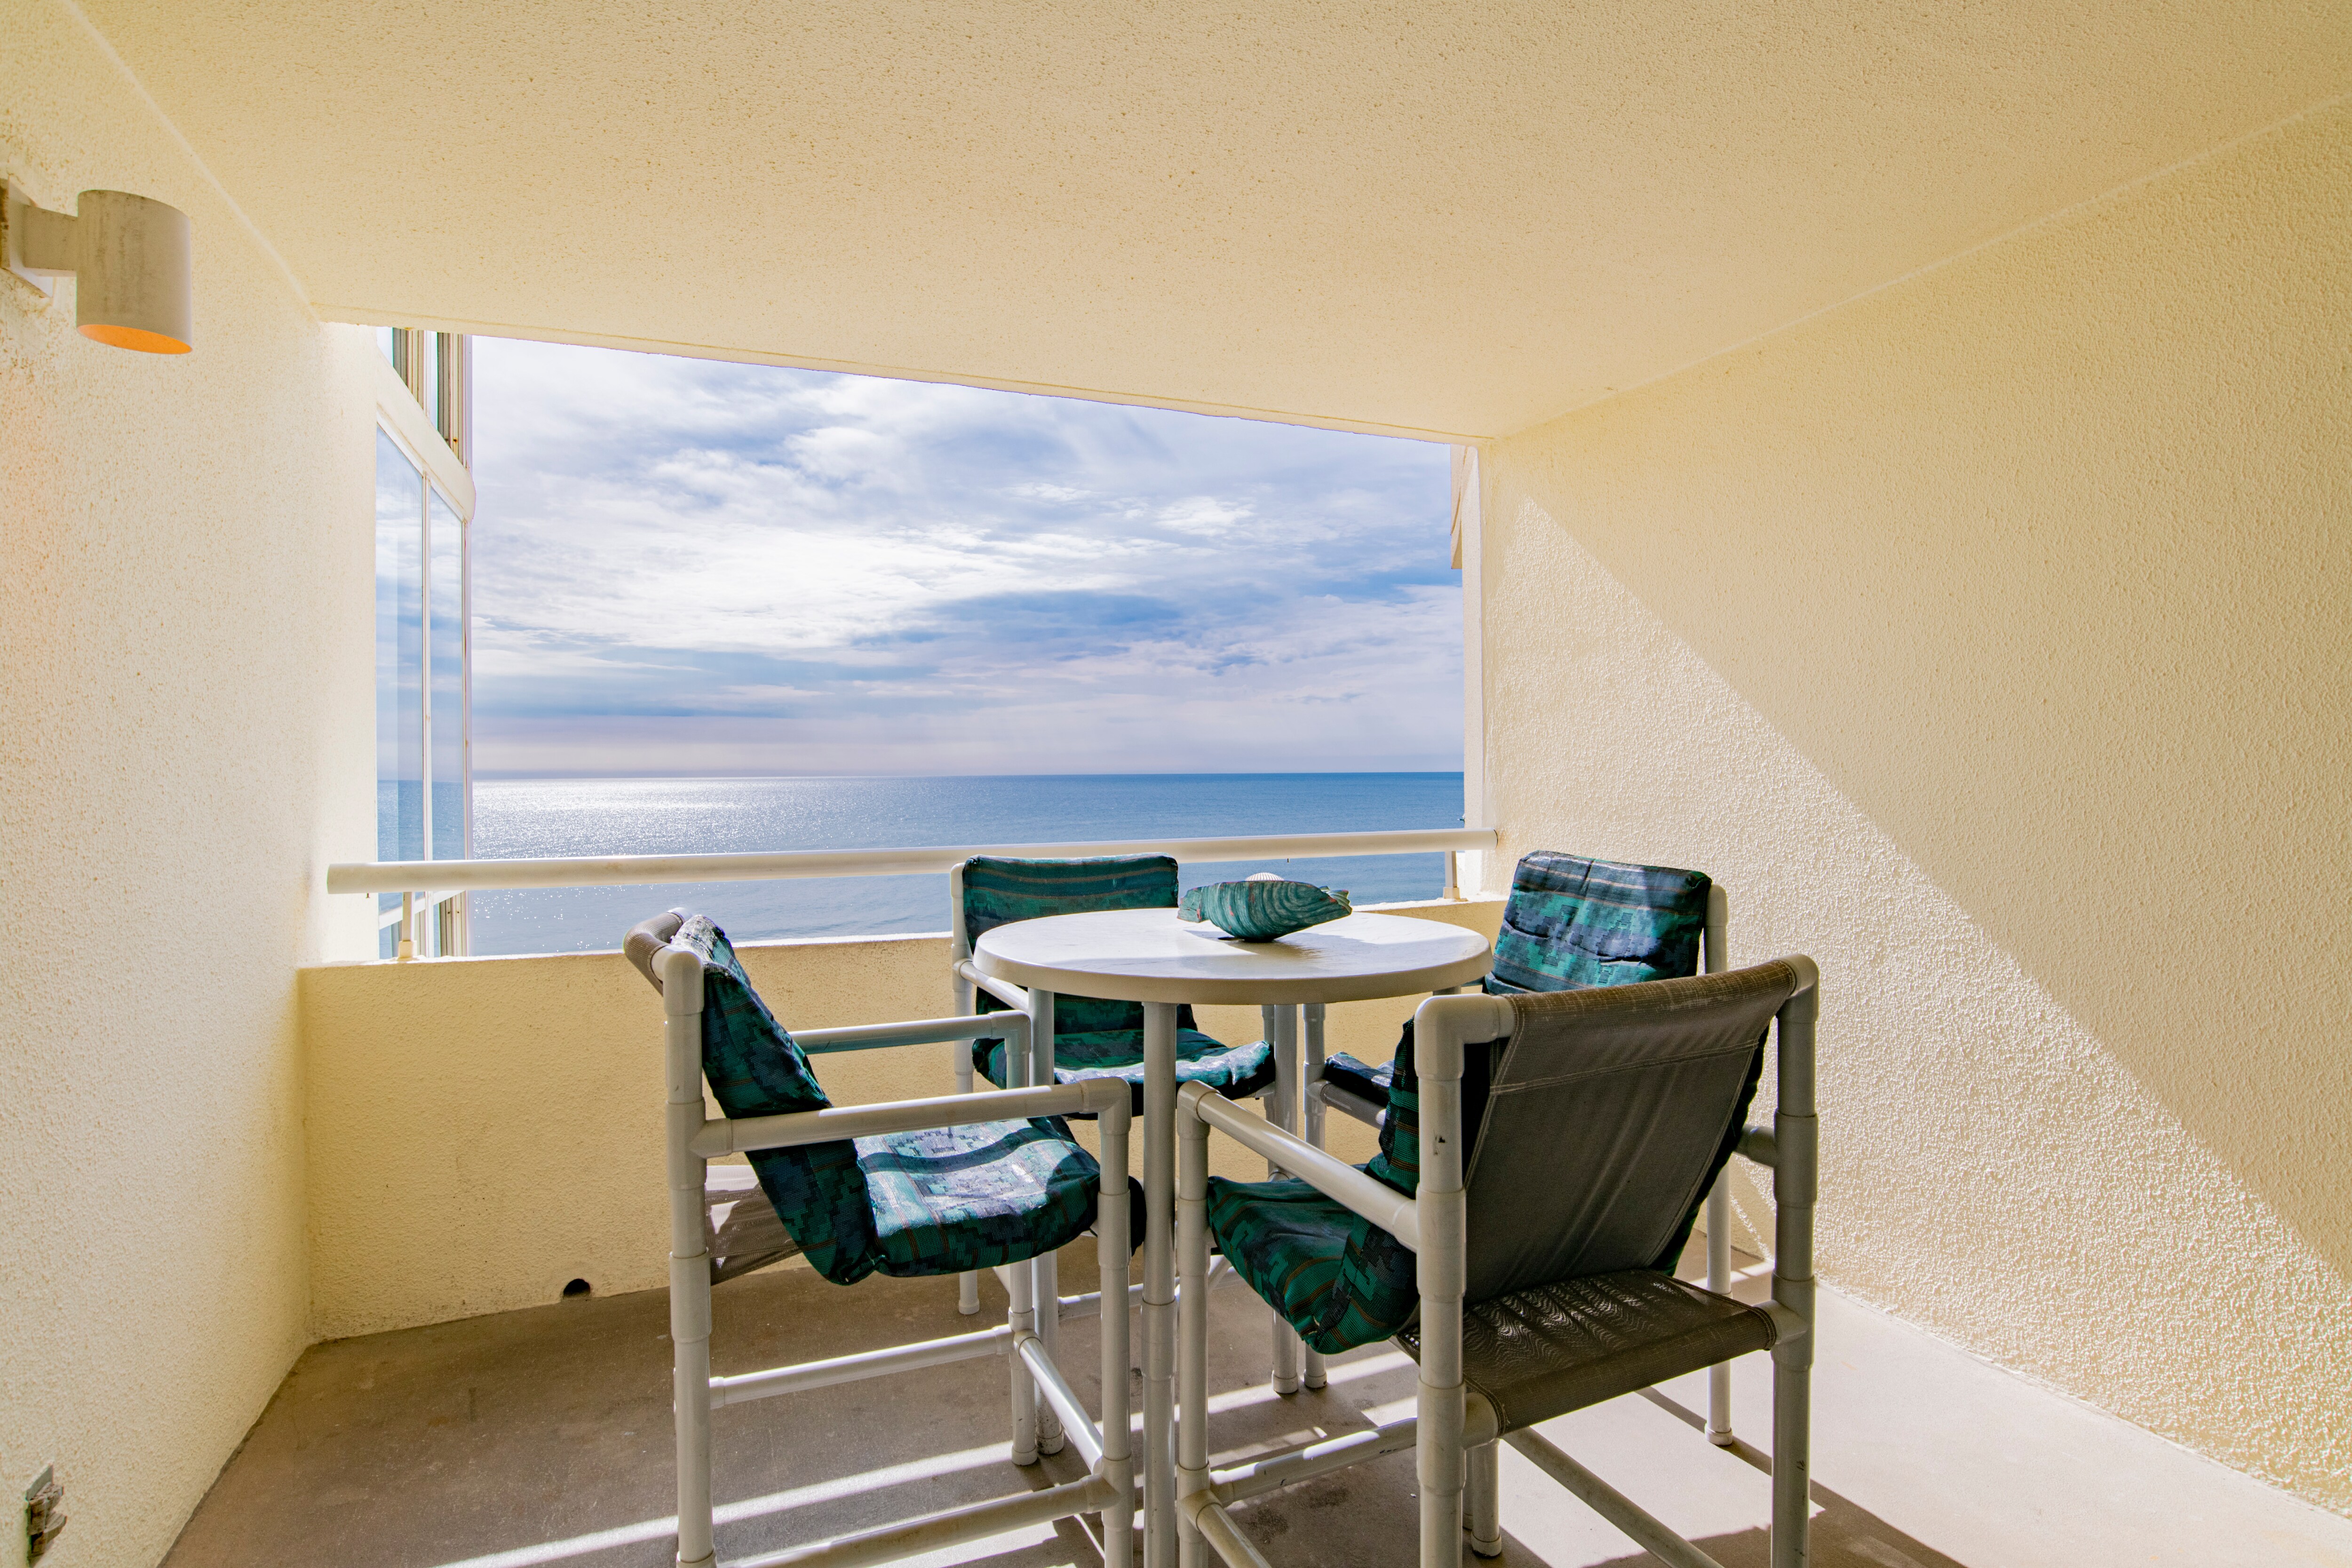 Property Image 1 - The 9th Floor Offers A True Blue View Of The Sparkling Gulf Of Mexico!